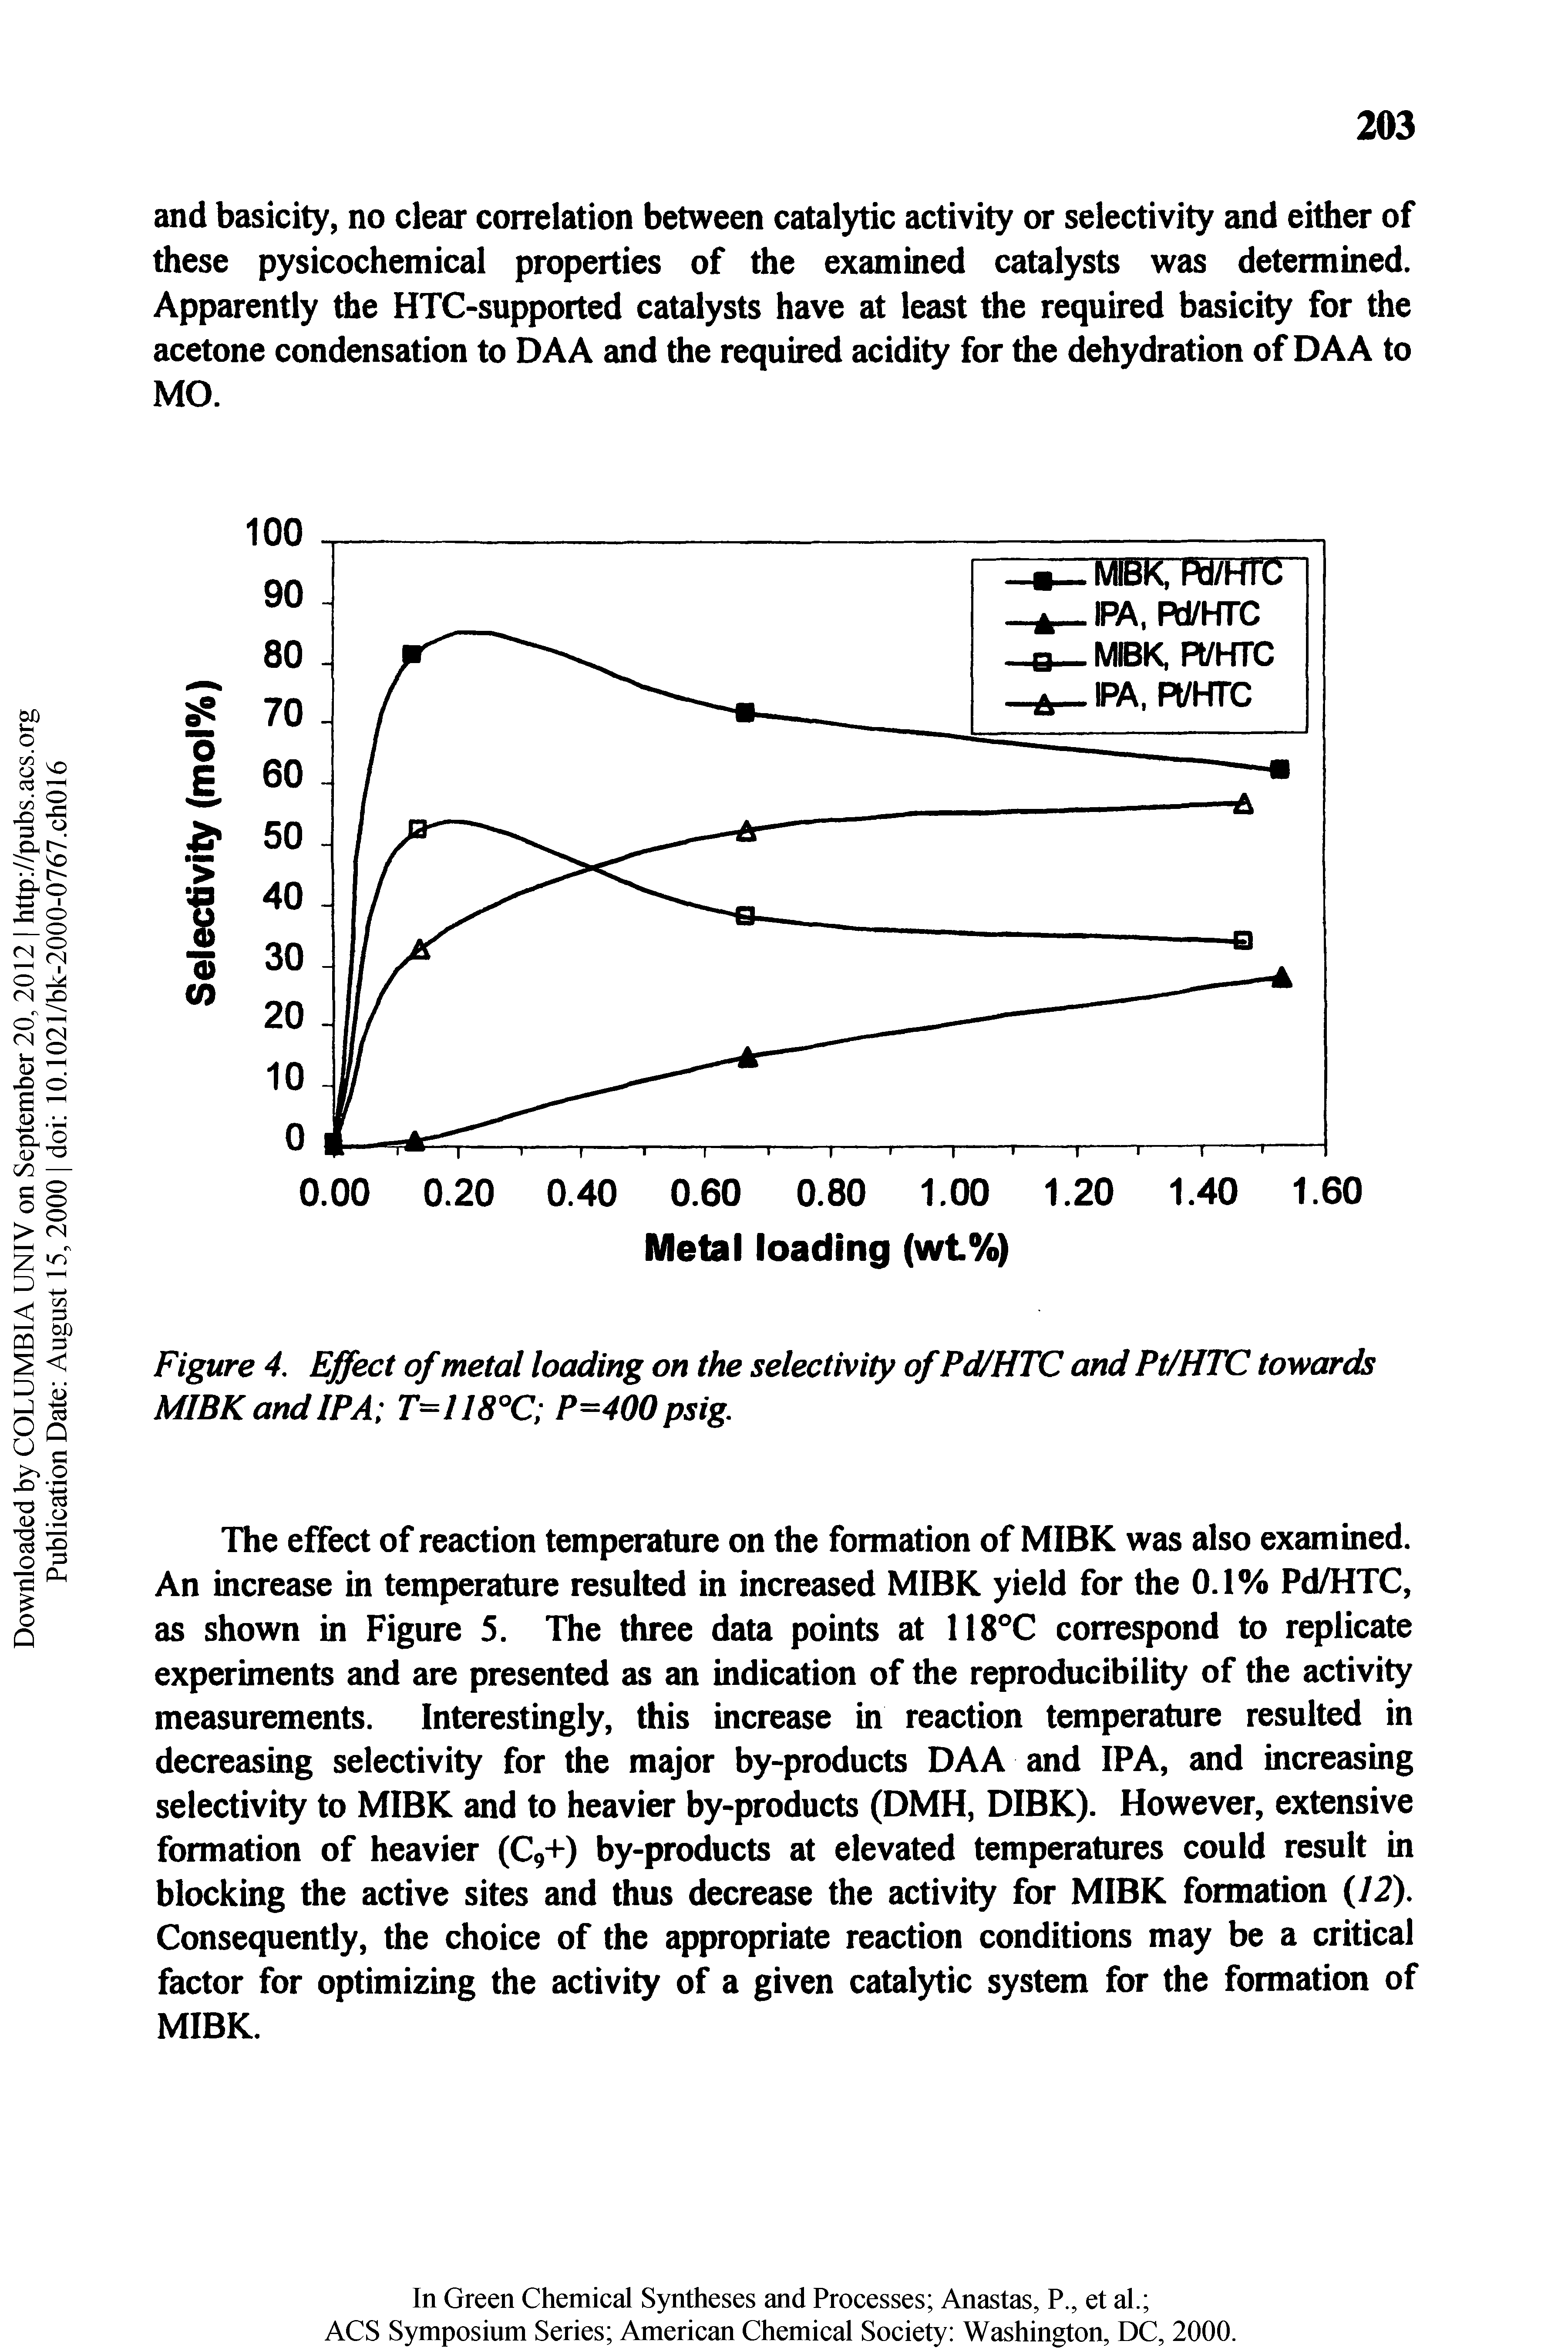 Figure 4, Effect of metal loading on the selectivity ofPd/HTC and Pt/HTC towards MIBKandIPA T=1I8°C P=400psig.